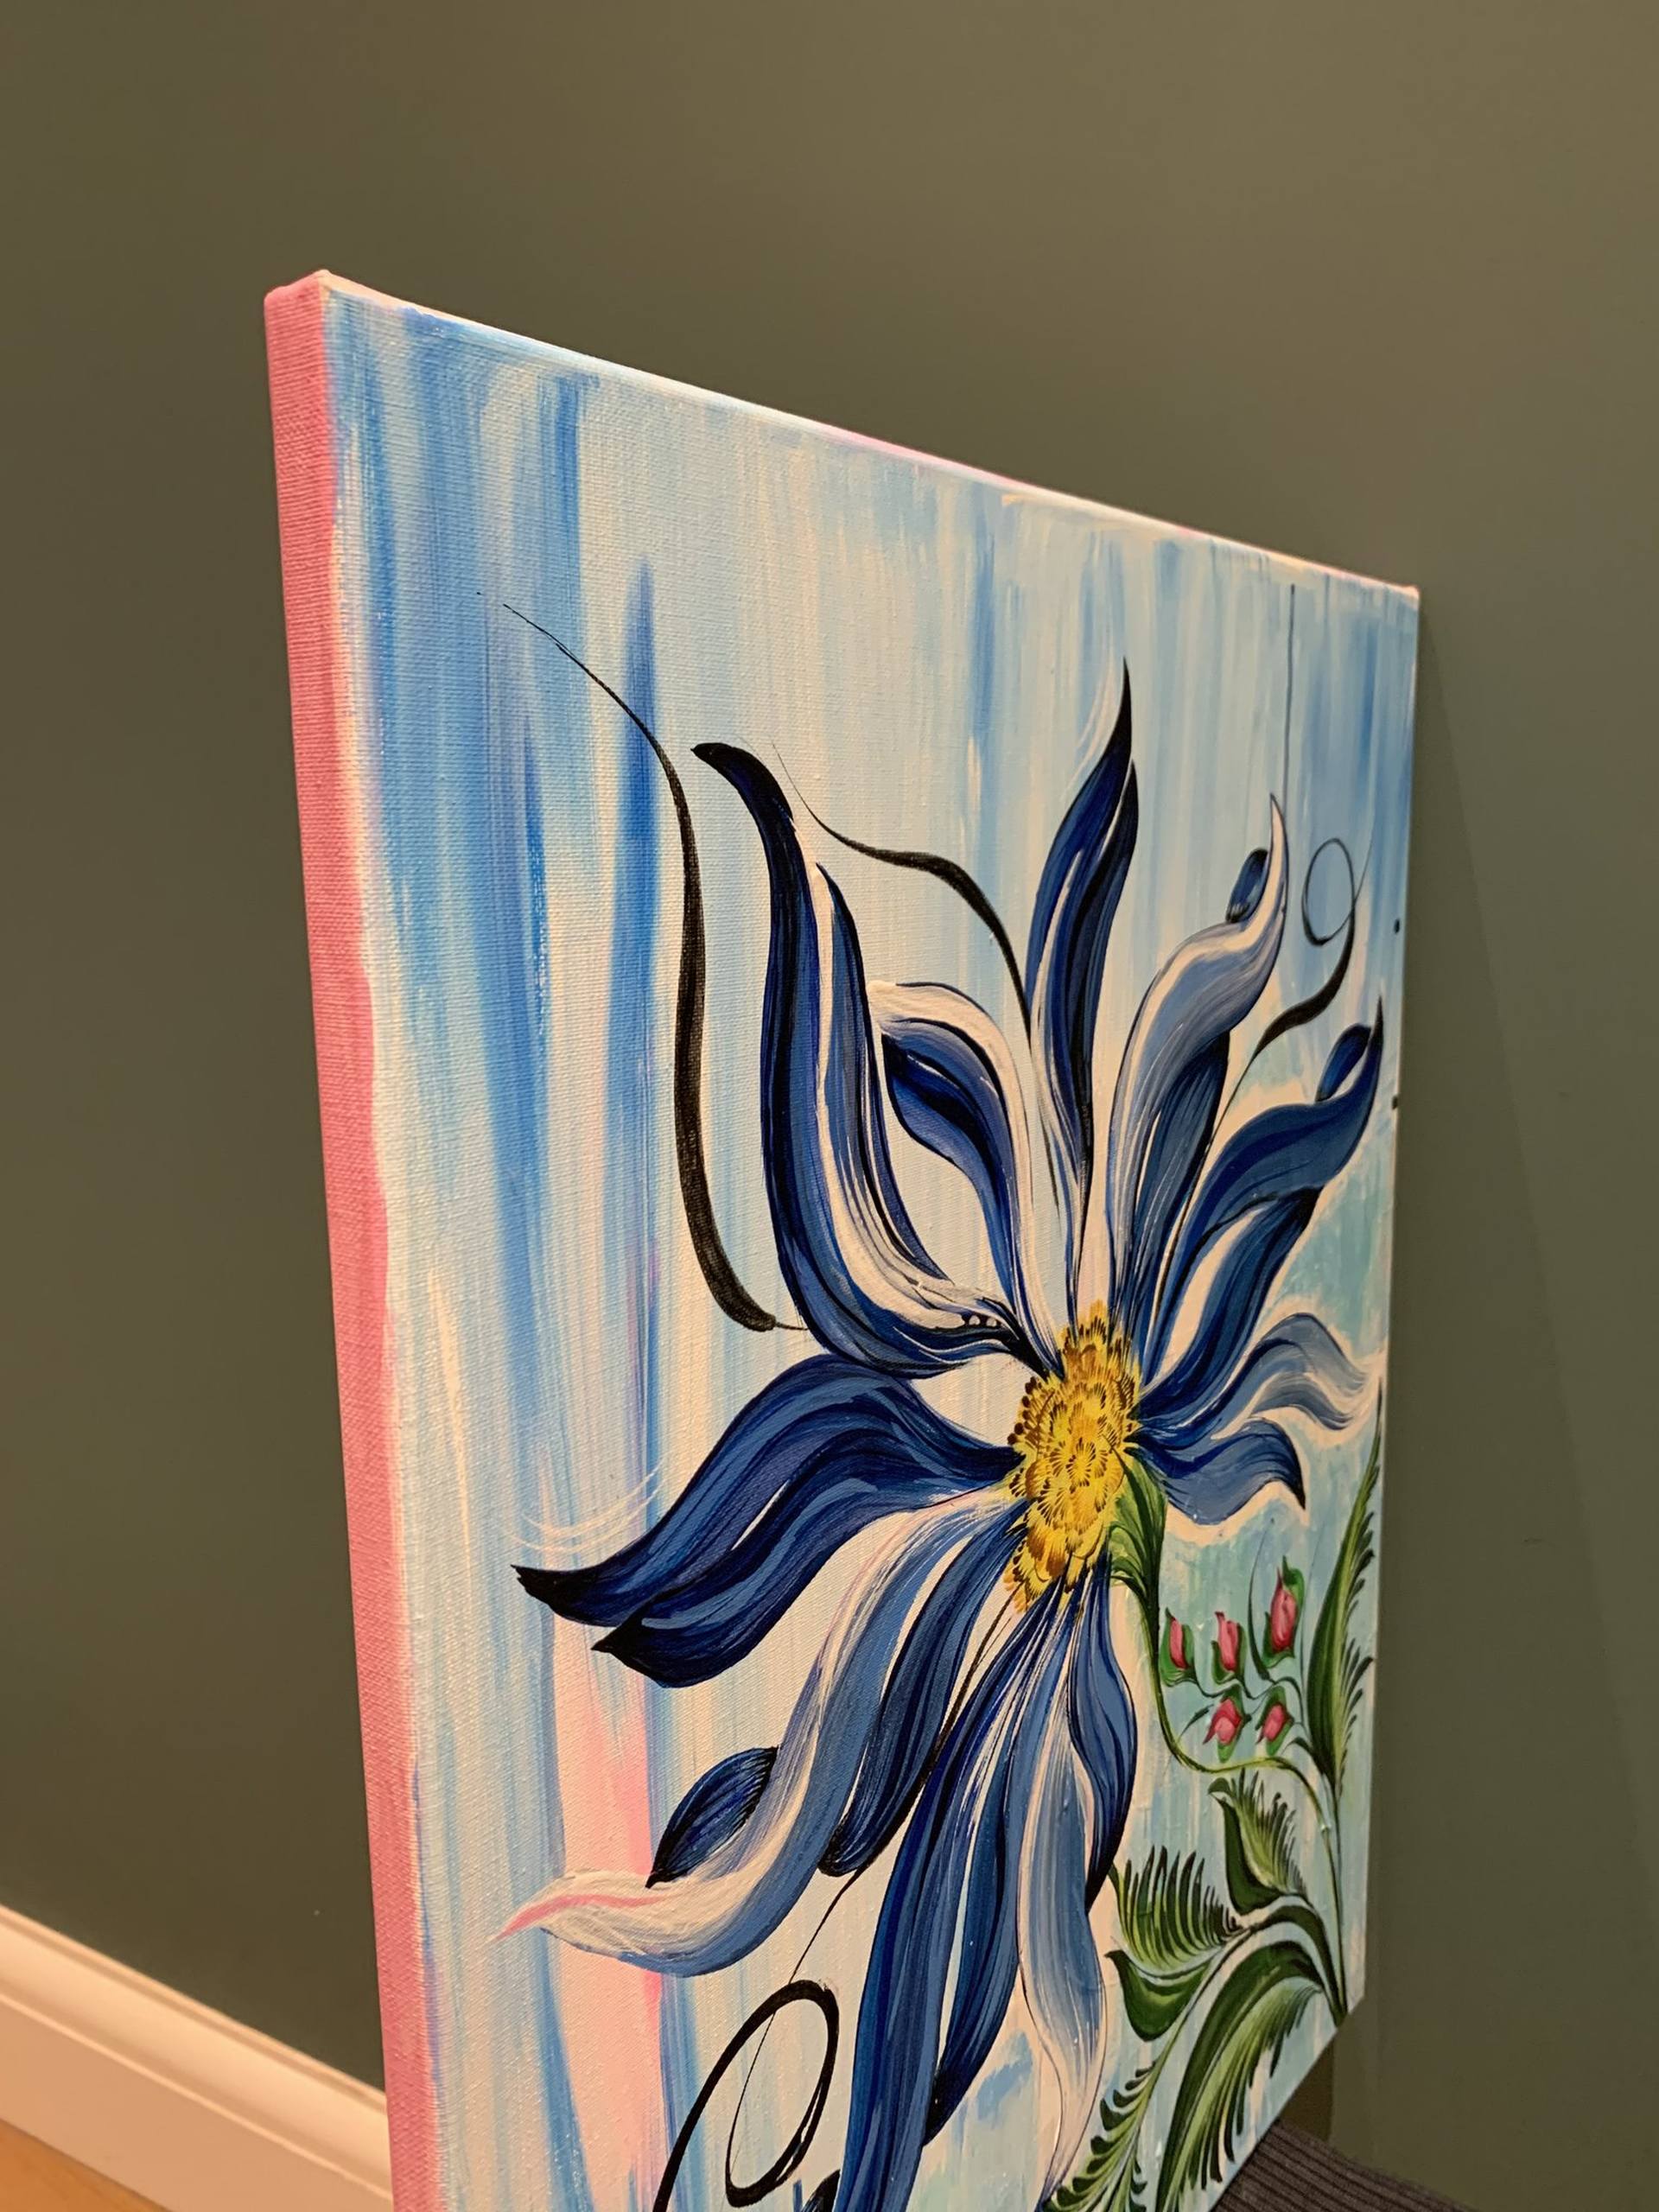 easy flower canvas painting ideas